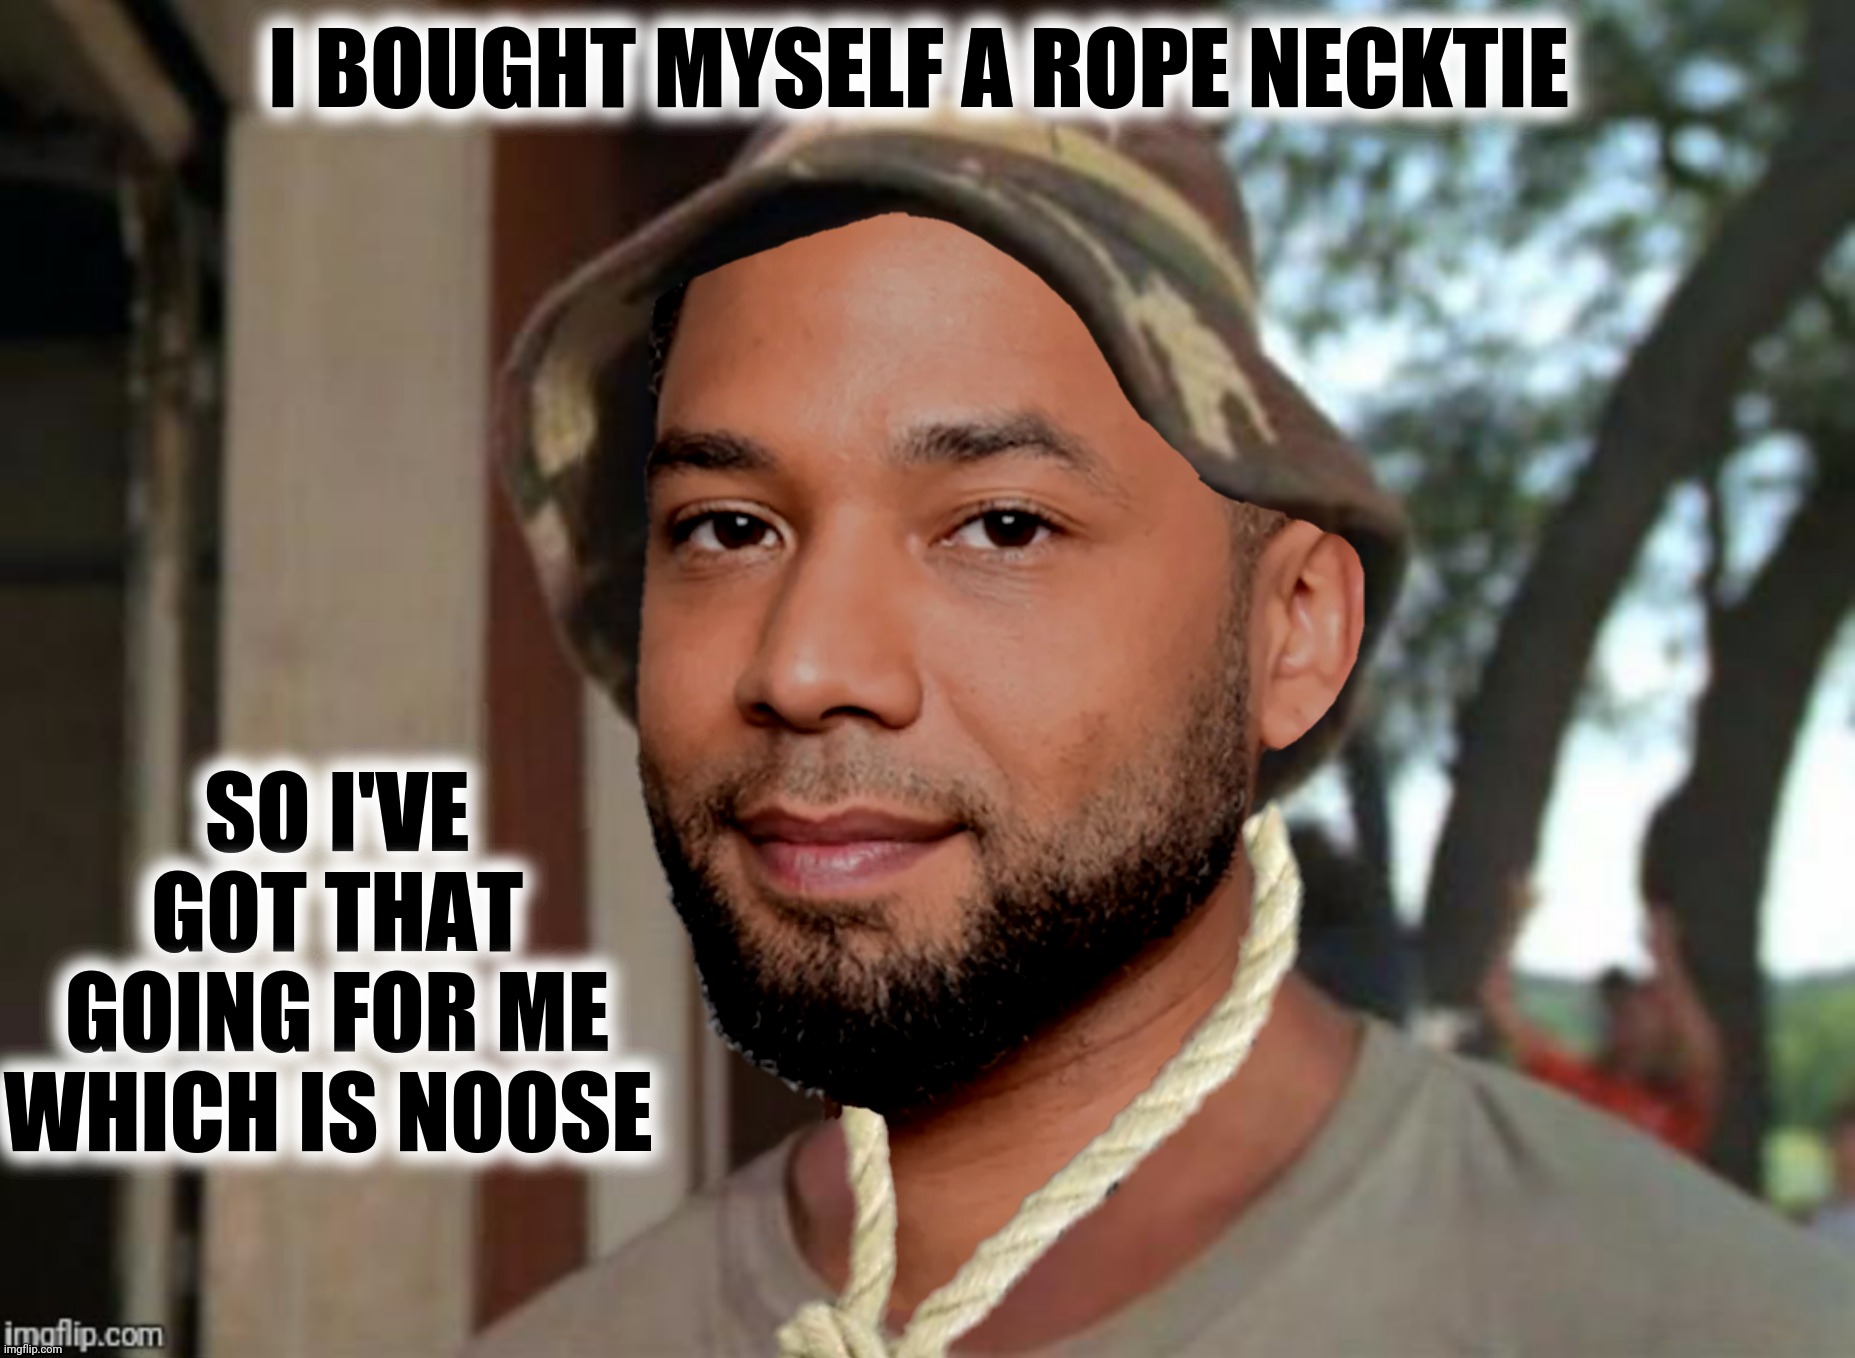 No noose is good noose! |  I BOUGHT MYSELF A ROPE NECKTIE; SO I'VE GOT THAT GOING FOR ME WHICH IS NOOSE | image tagged in bad photoshop,caddyshack,jussie smollett,noose | made w/ Imgflip meme maker